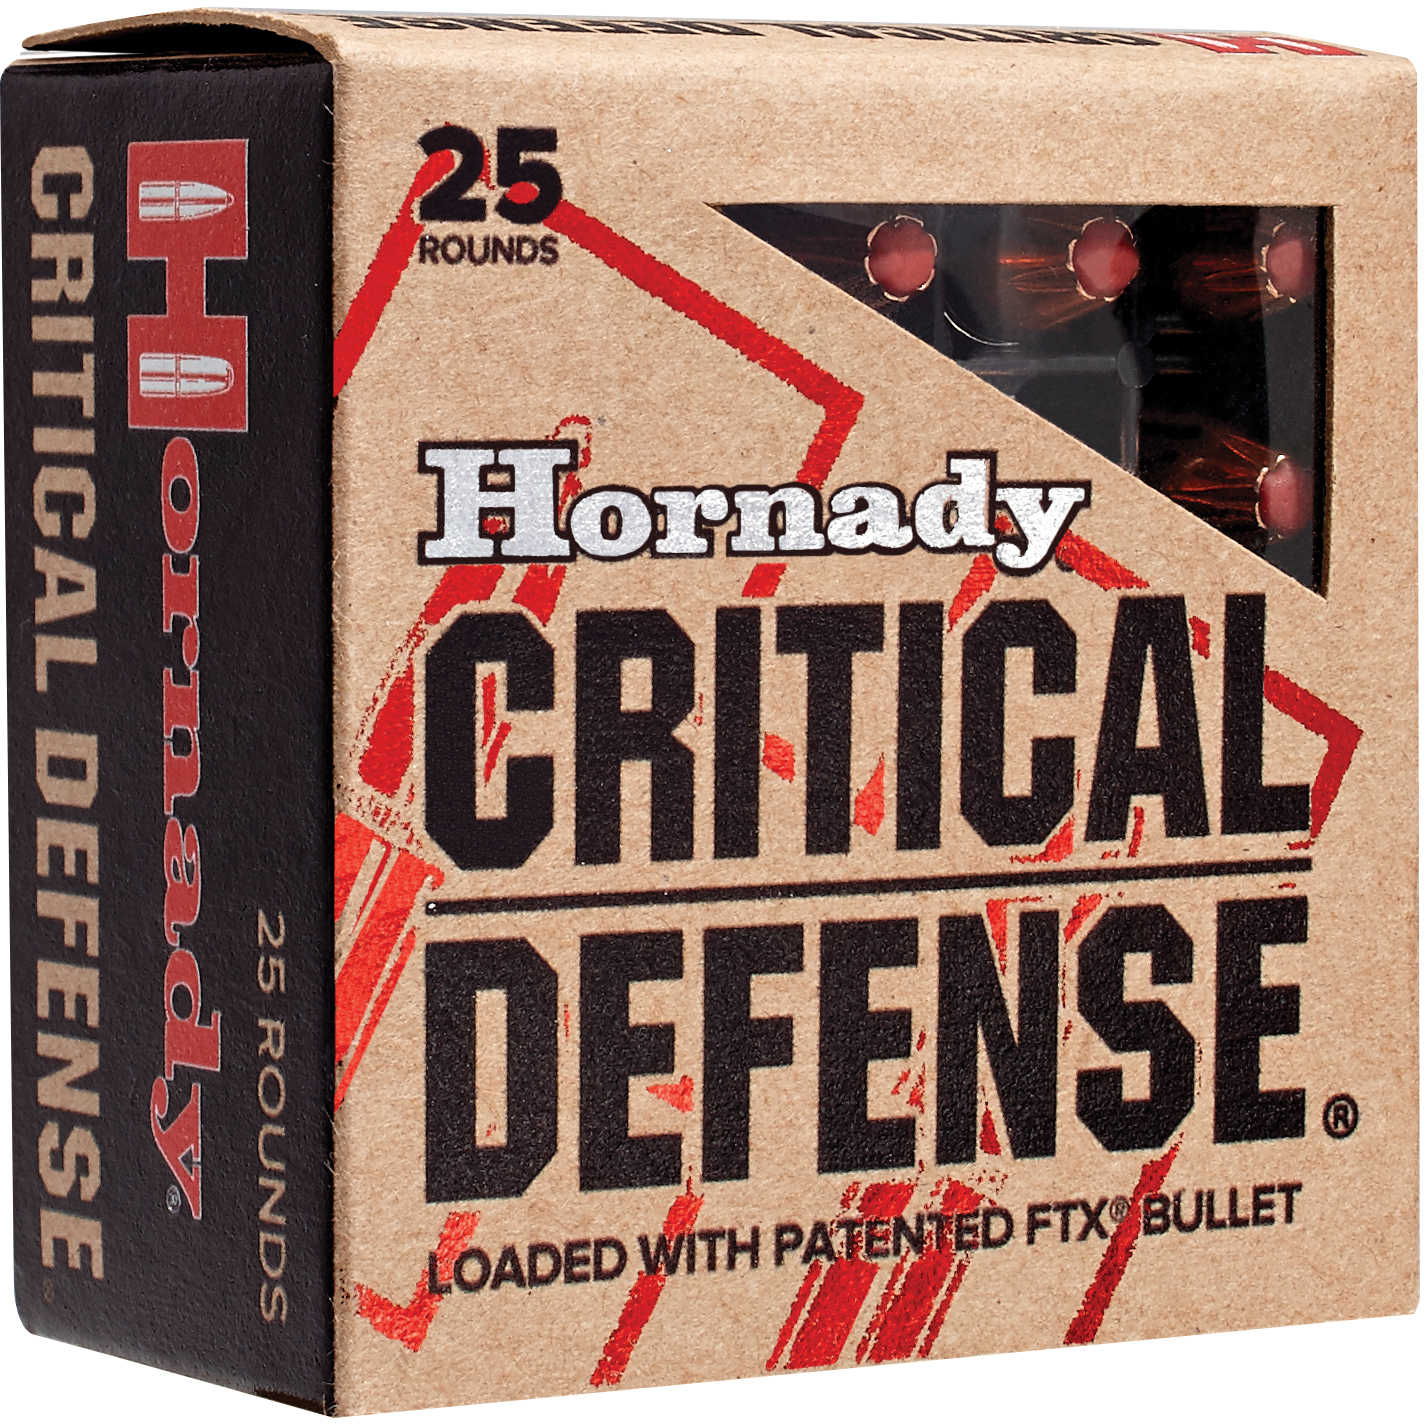 25 ACP 25 Rounds Ammunition Hornady 35 Grain Jacketed Hollow Point